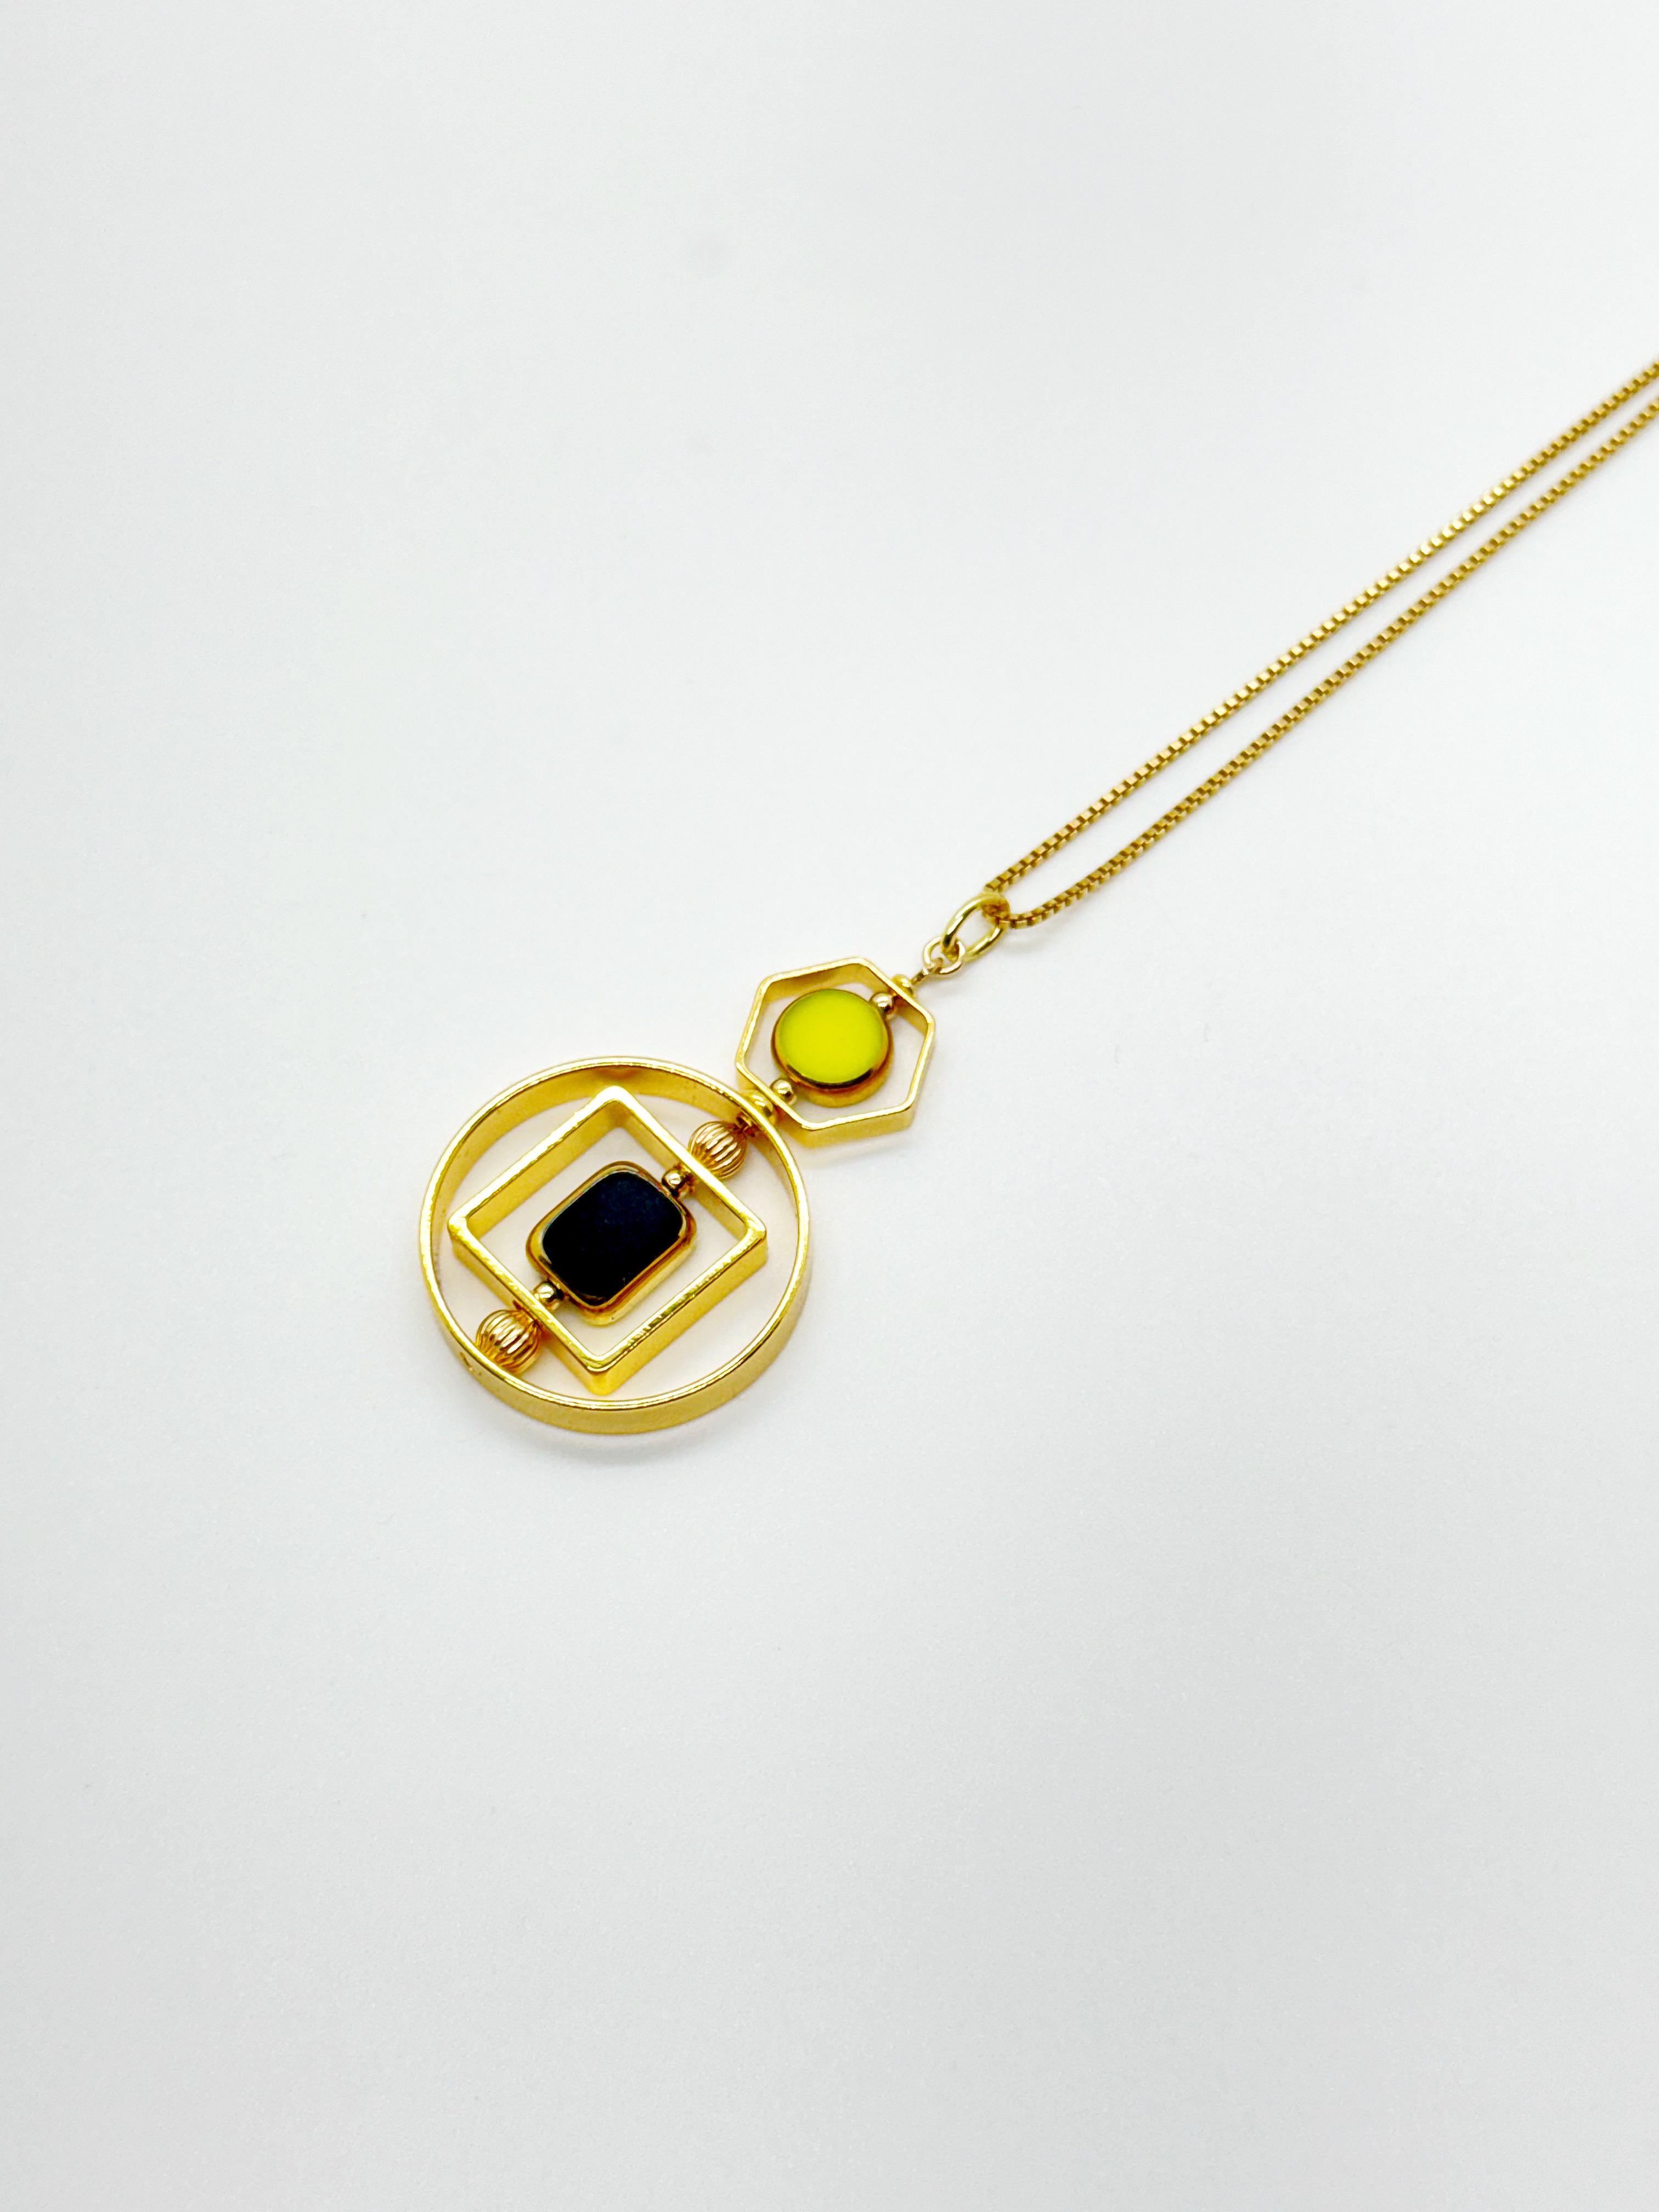 The pendant consist of black and chartreuse vintage German glass beads and finished with a 18 inch gold filled chain. 

The beads are new old stock vintage German glass beads that are framed with 24K gold. The beads were hand pressed during the